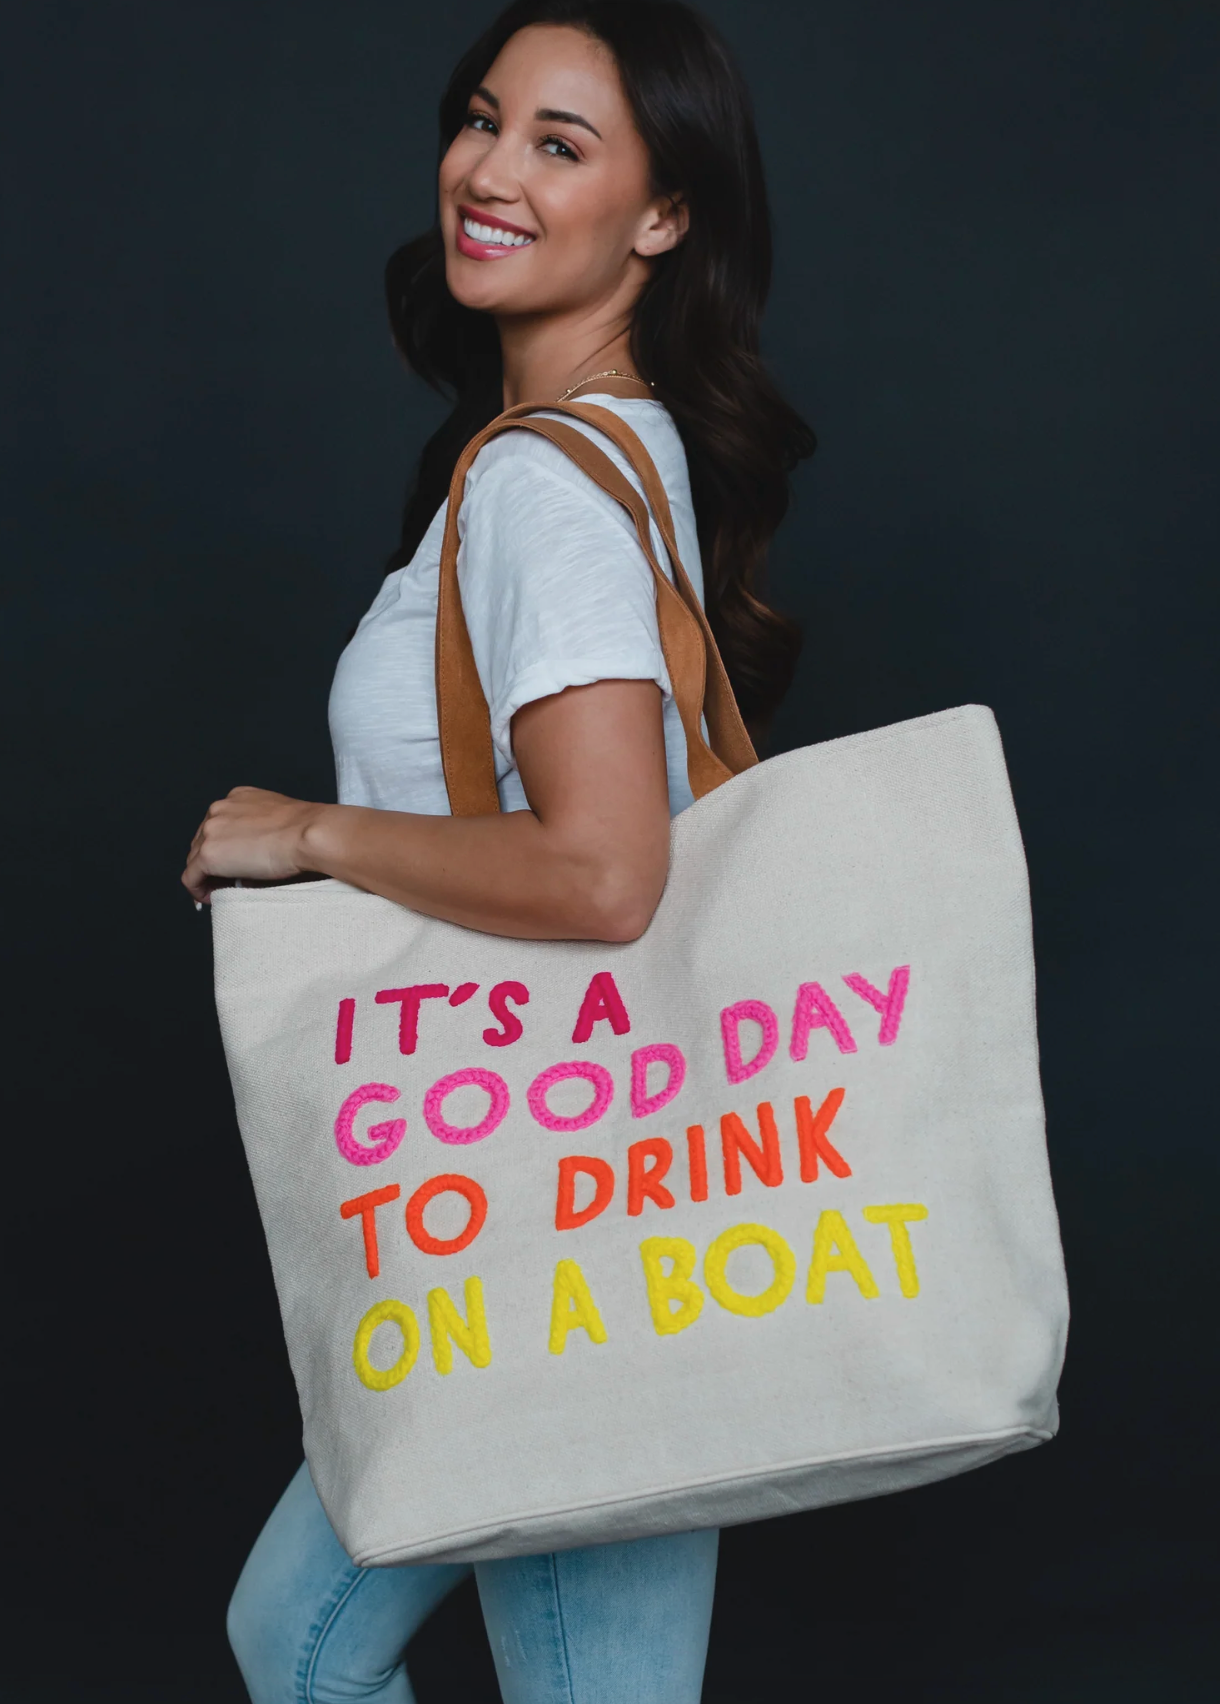 Drink On a Boat Tote